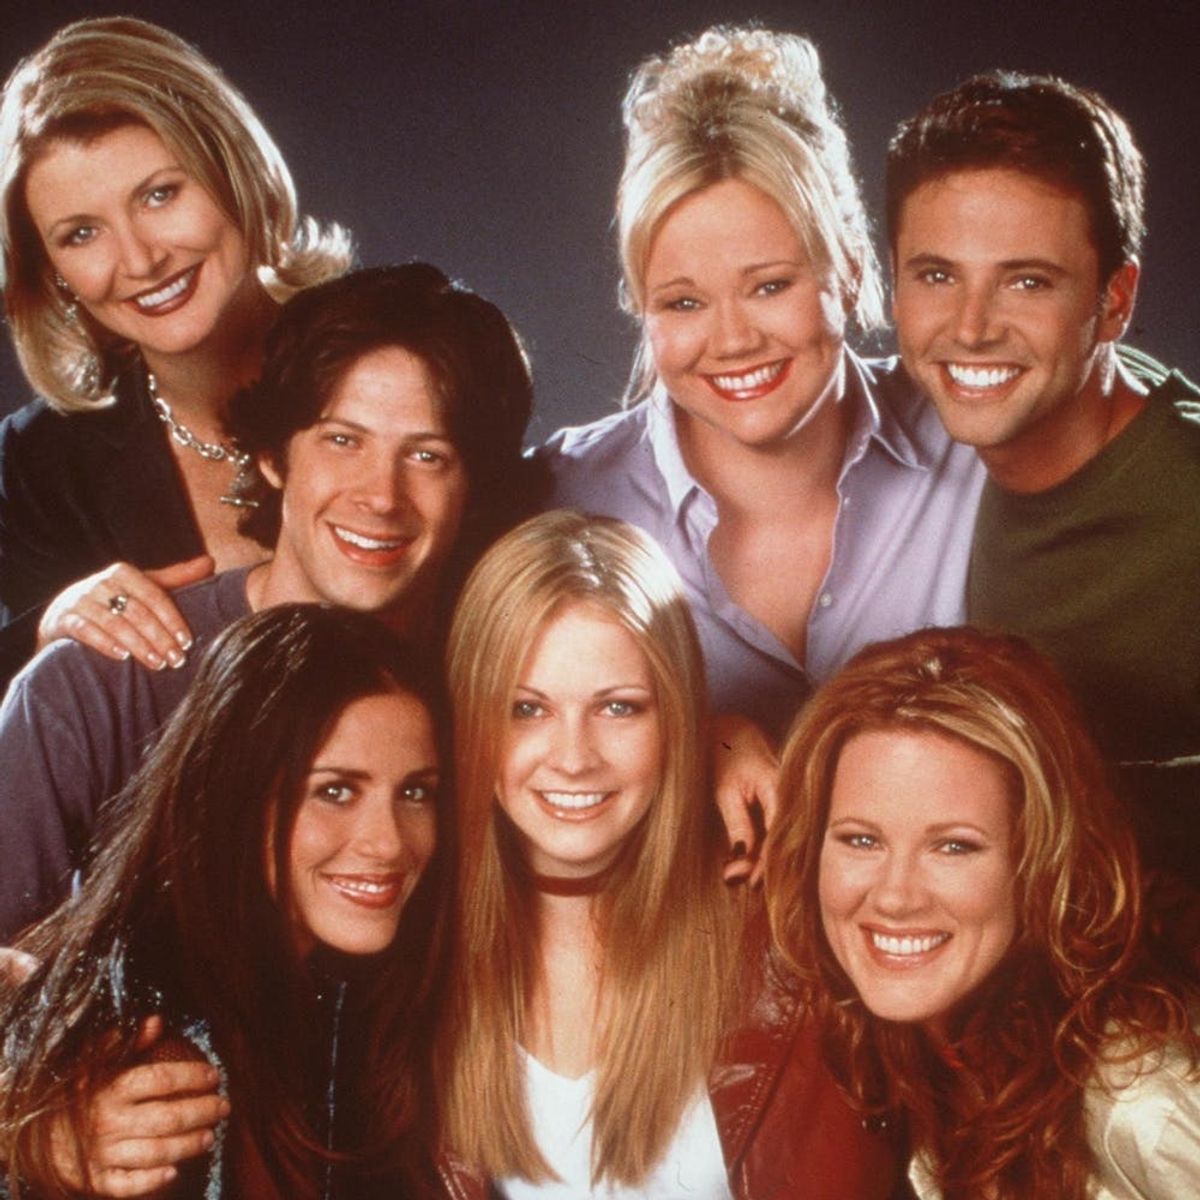 The Cast of “Sabrina the Teenage Witch” Reunited and Our ’90s Hearts Couldn’t Be Happier